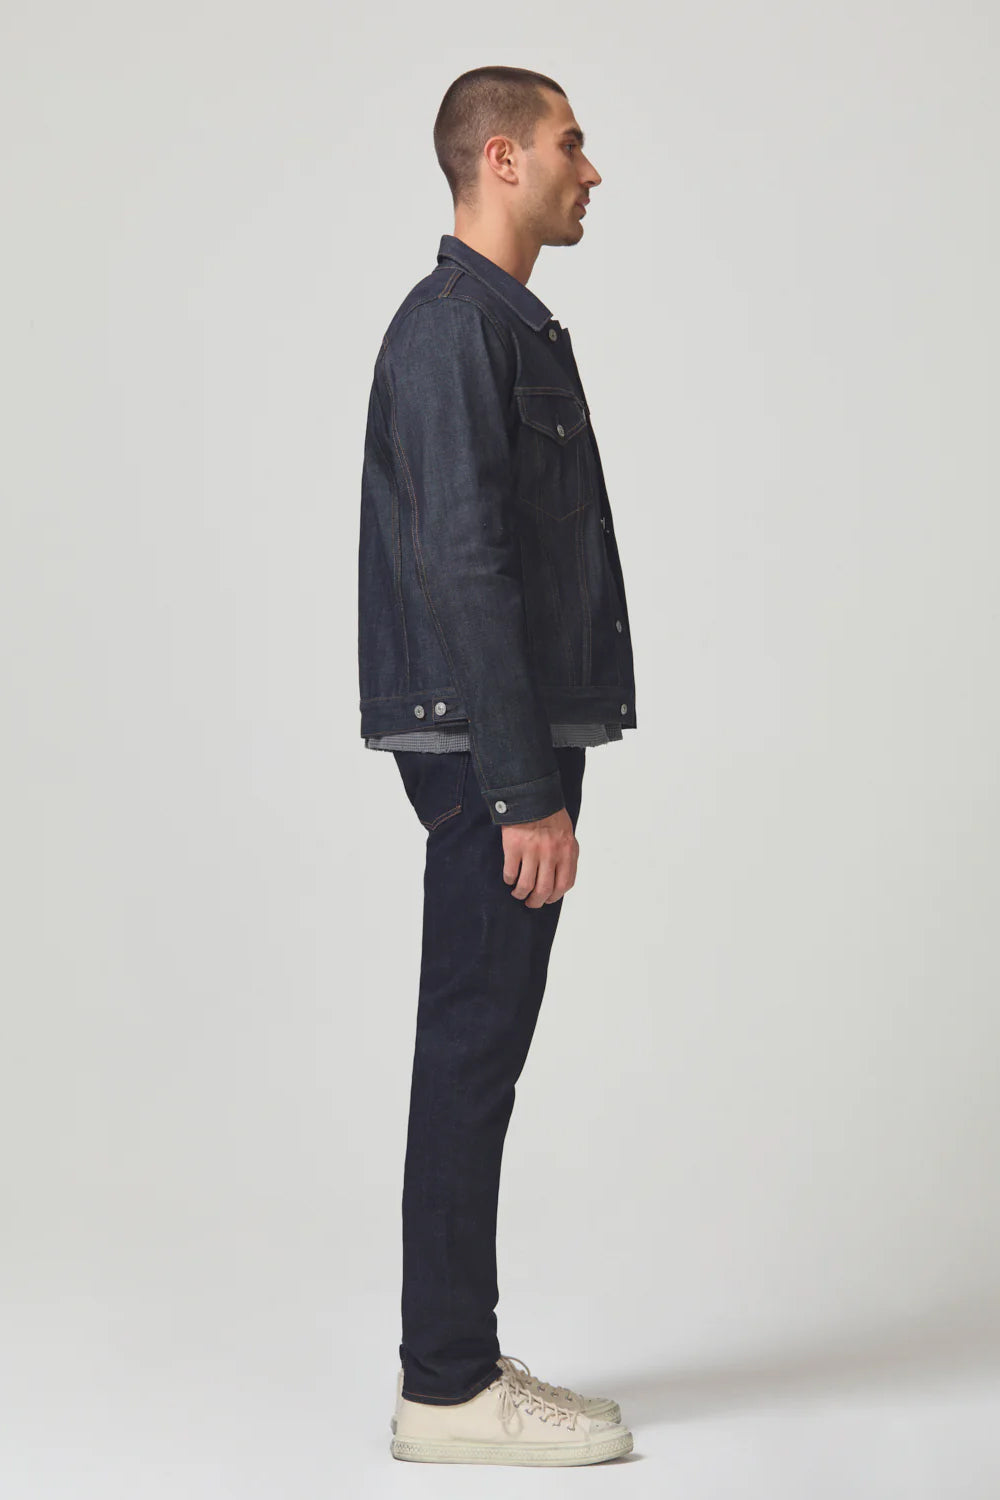 Adler Tapered Classic Archive Denim Citizens of Humanity   